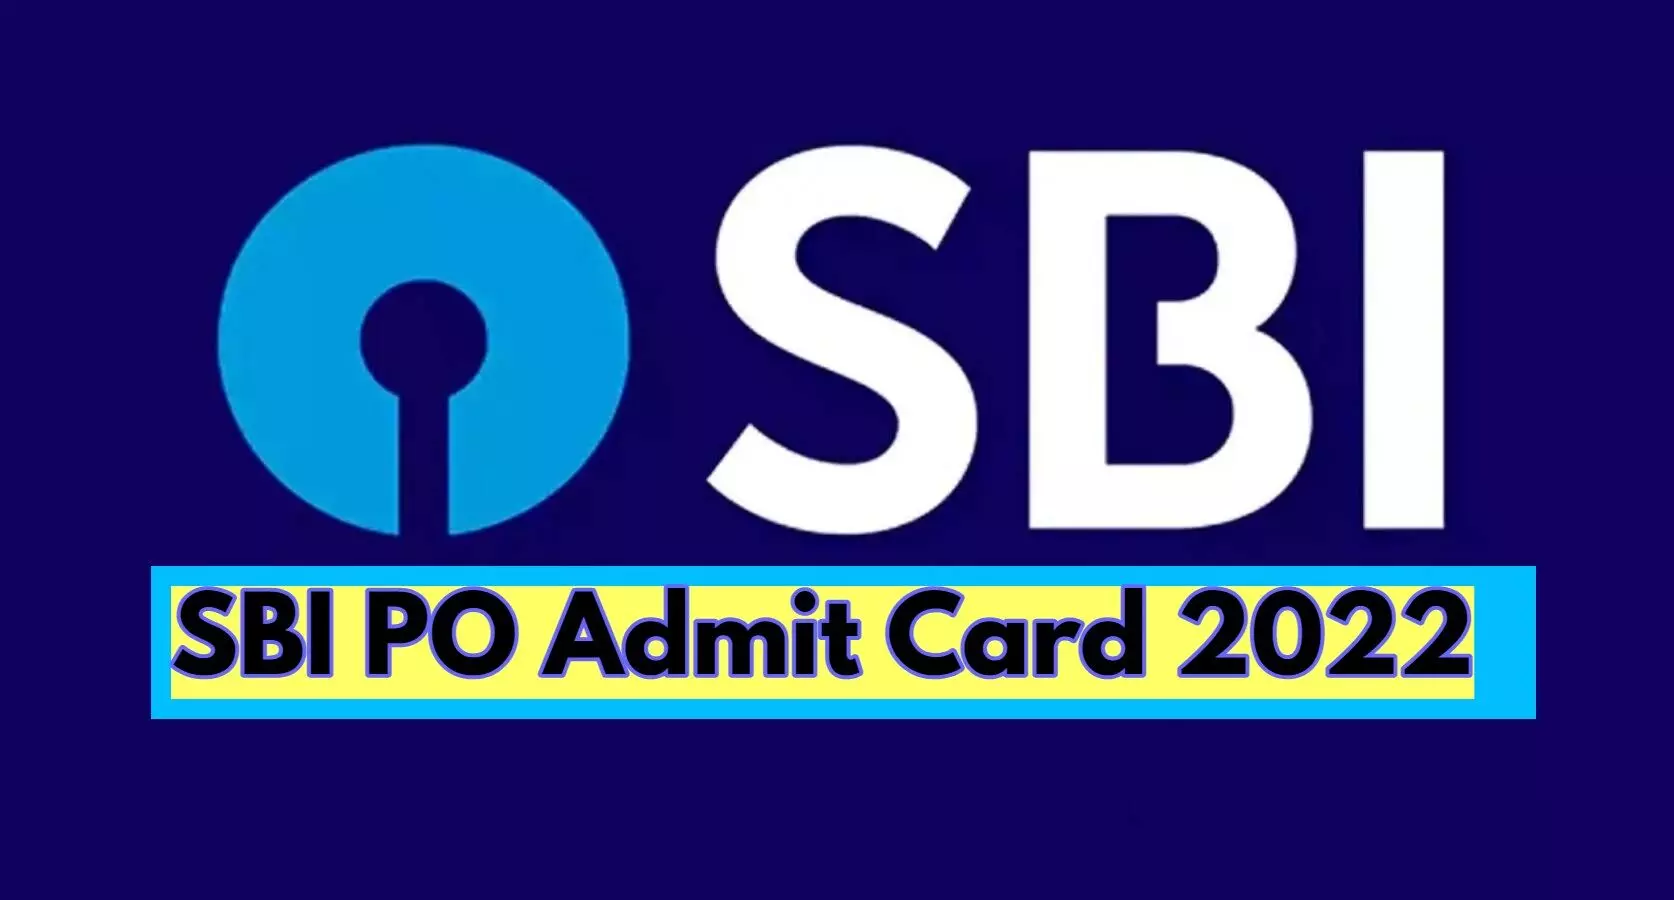 SBI PO Admit Card 2022 expected soon